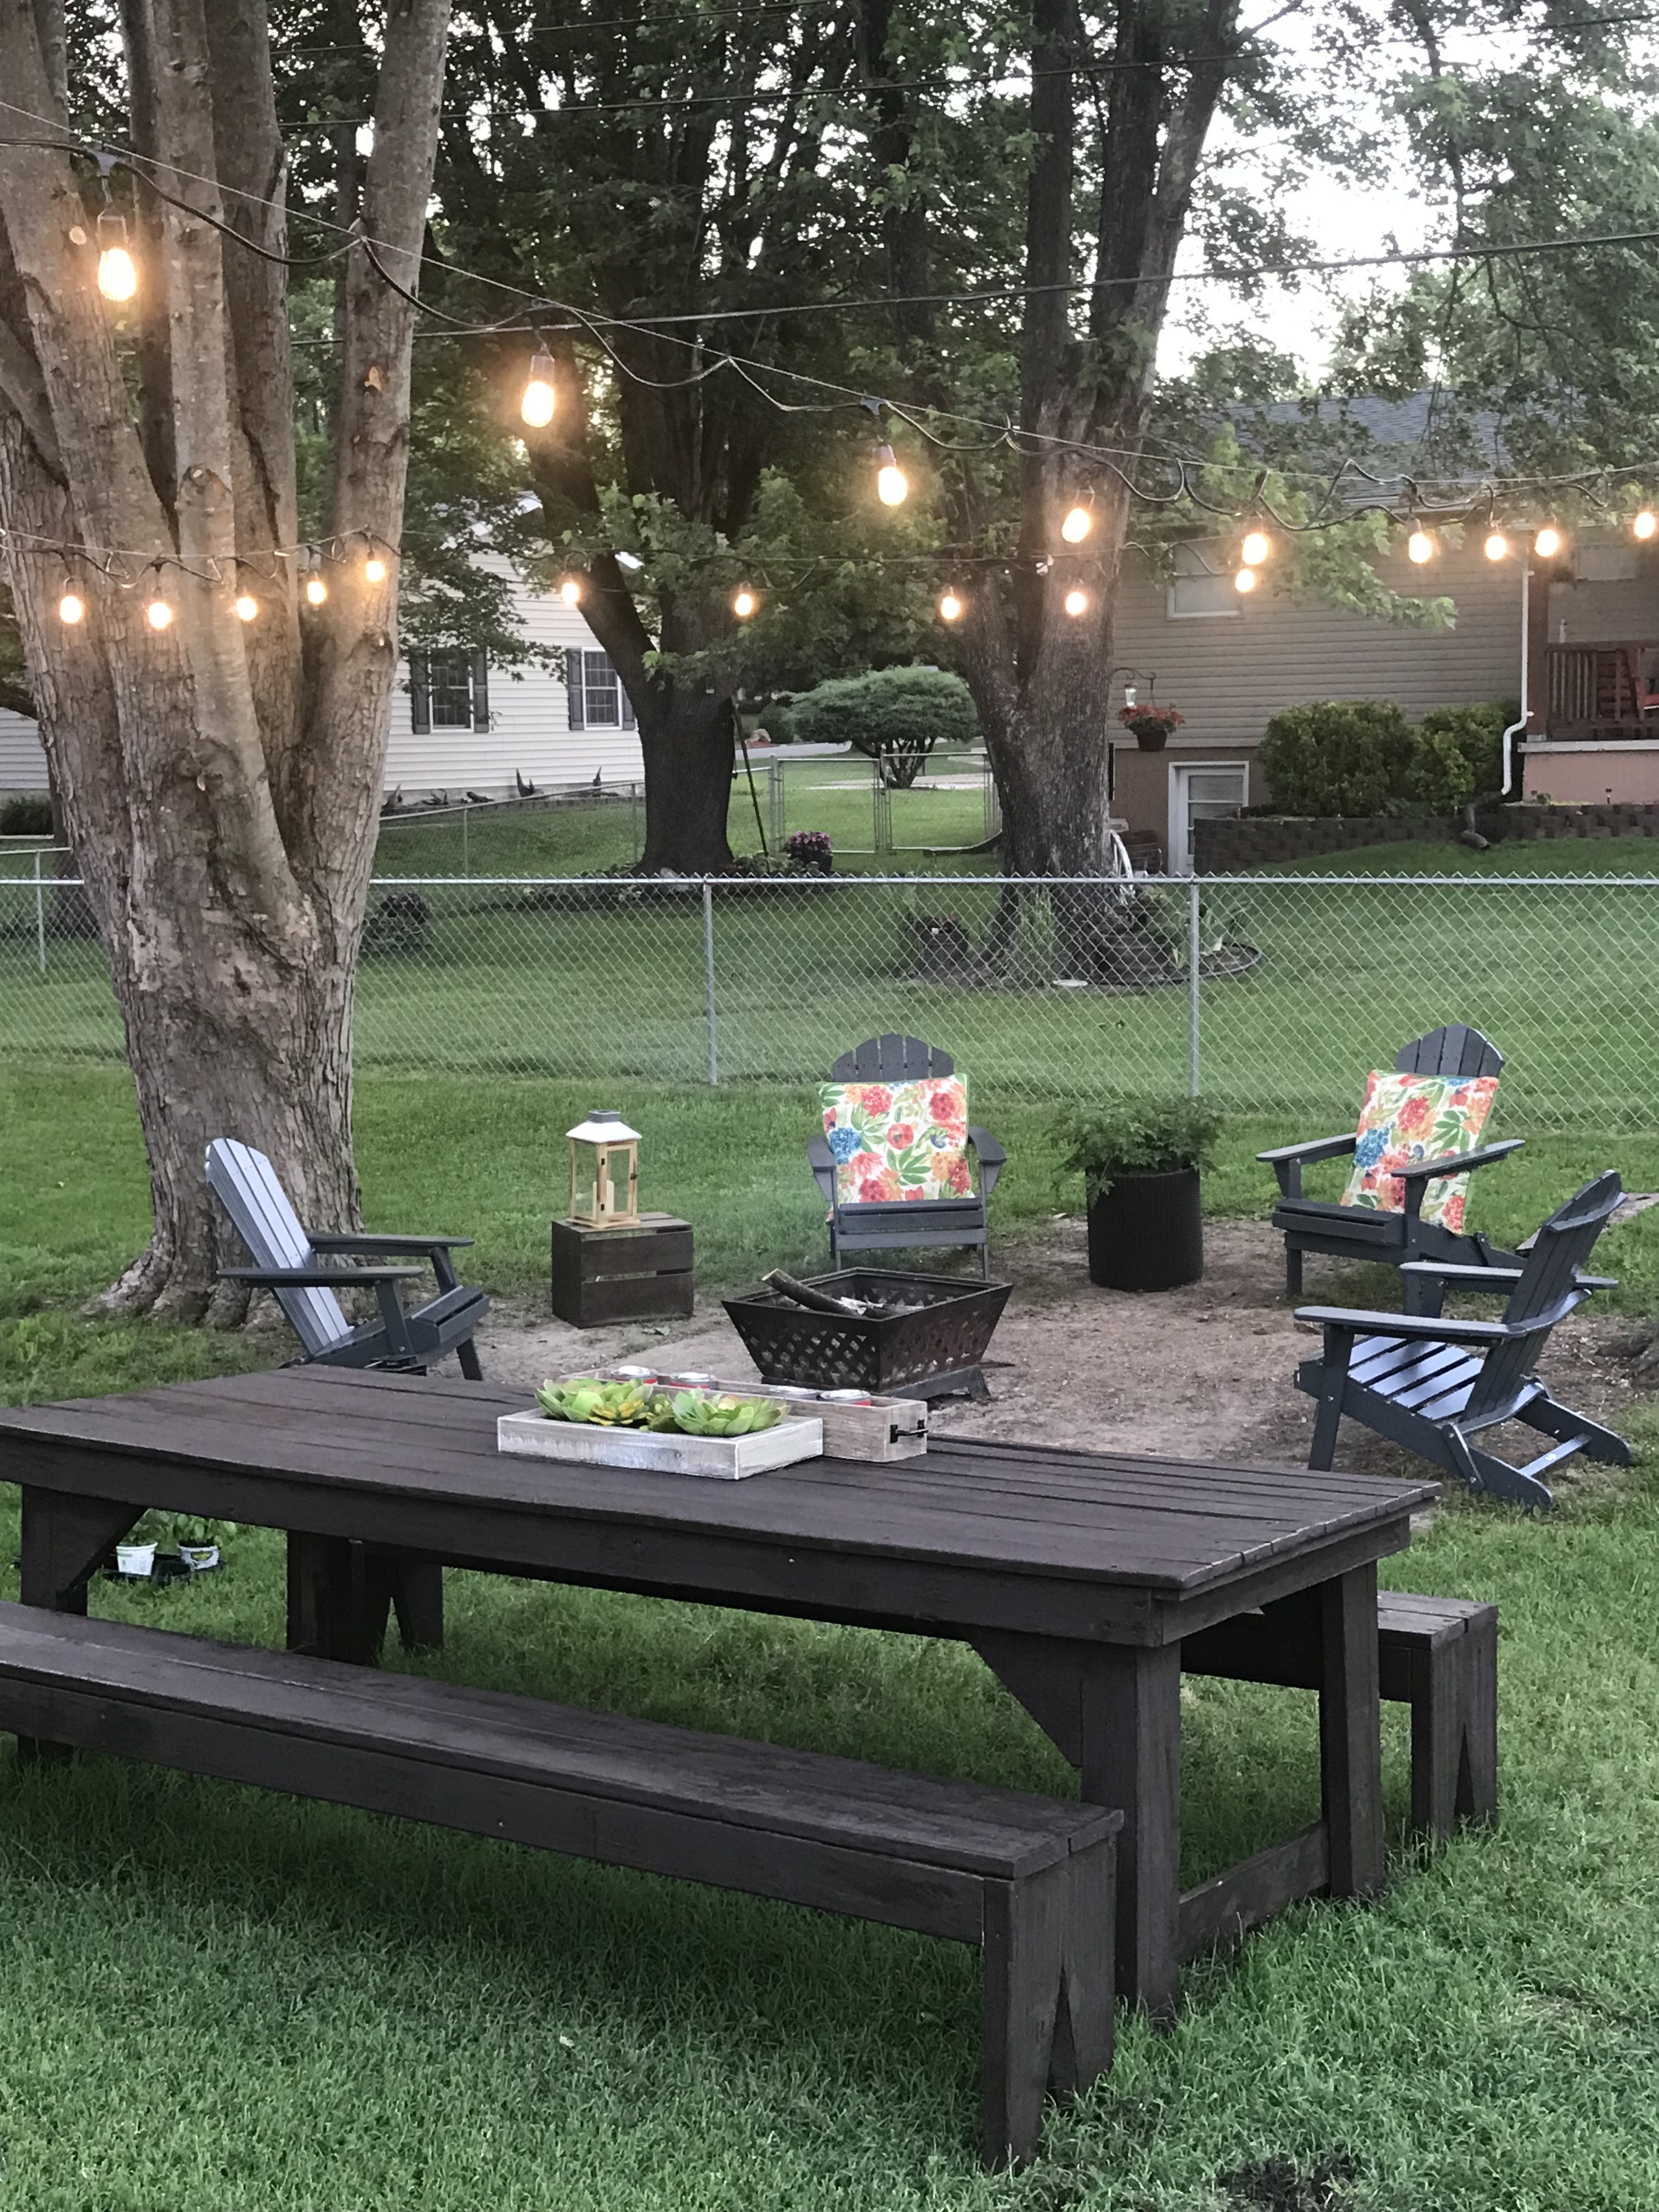 How To Hang Outdoor String Lights Backyard Diy Ideas A Cup Full Of Sass